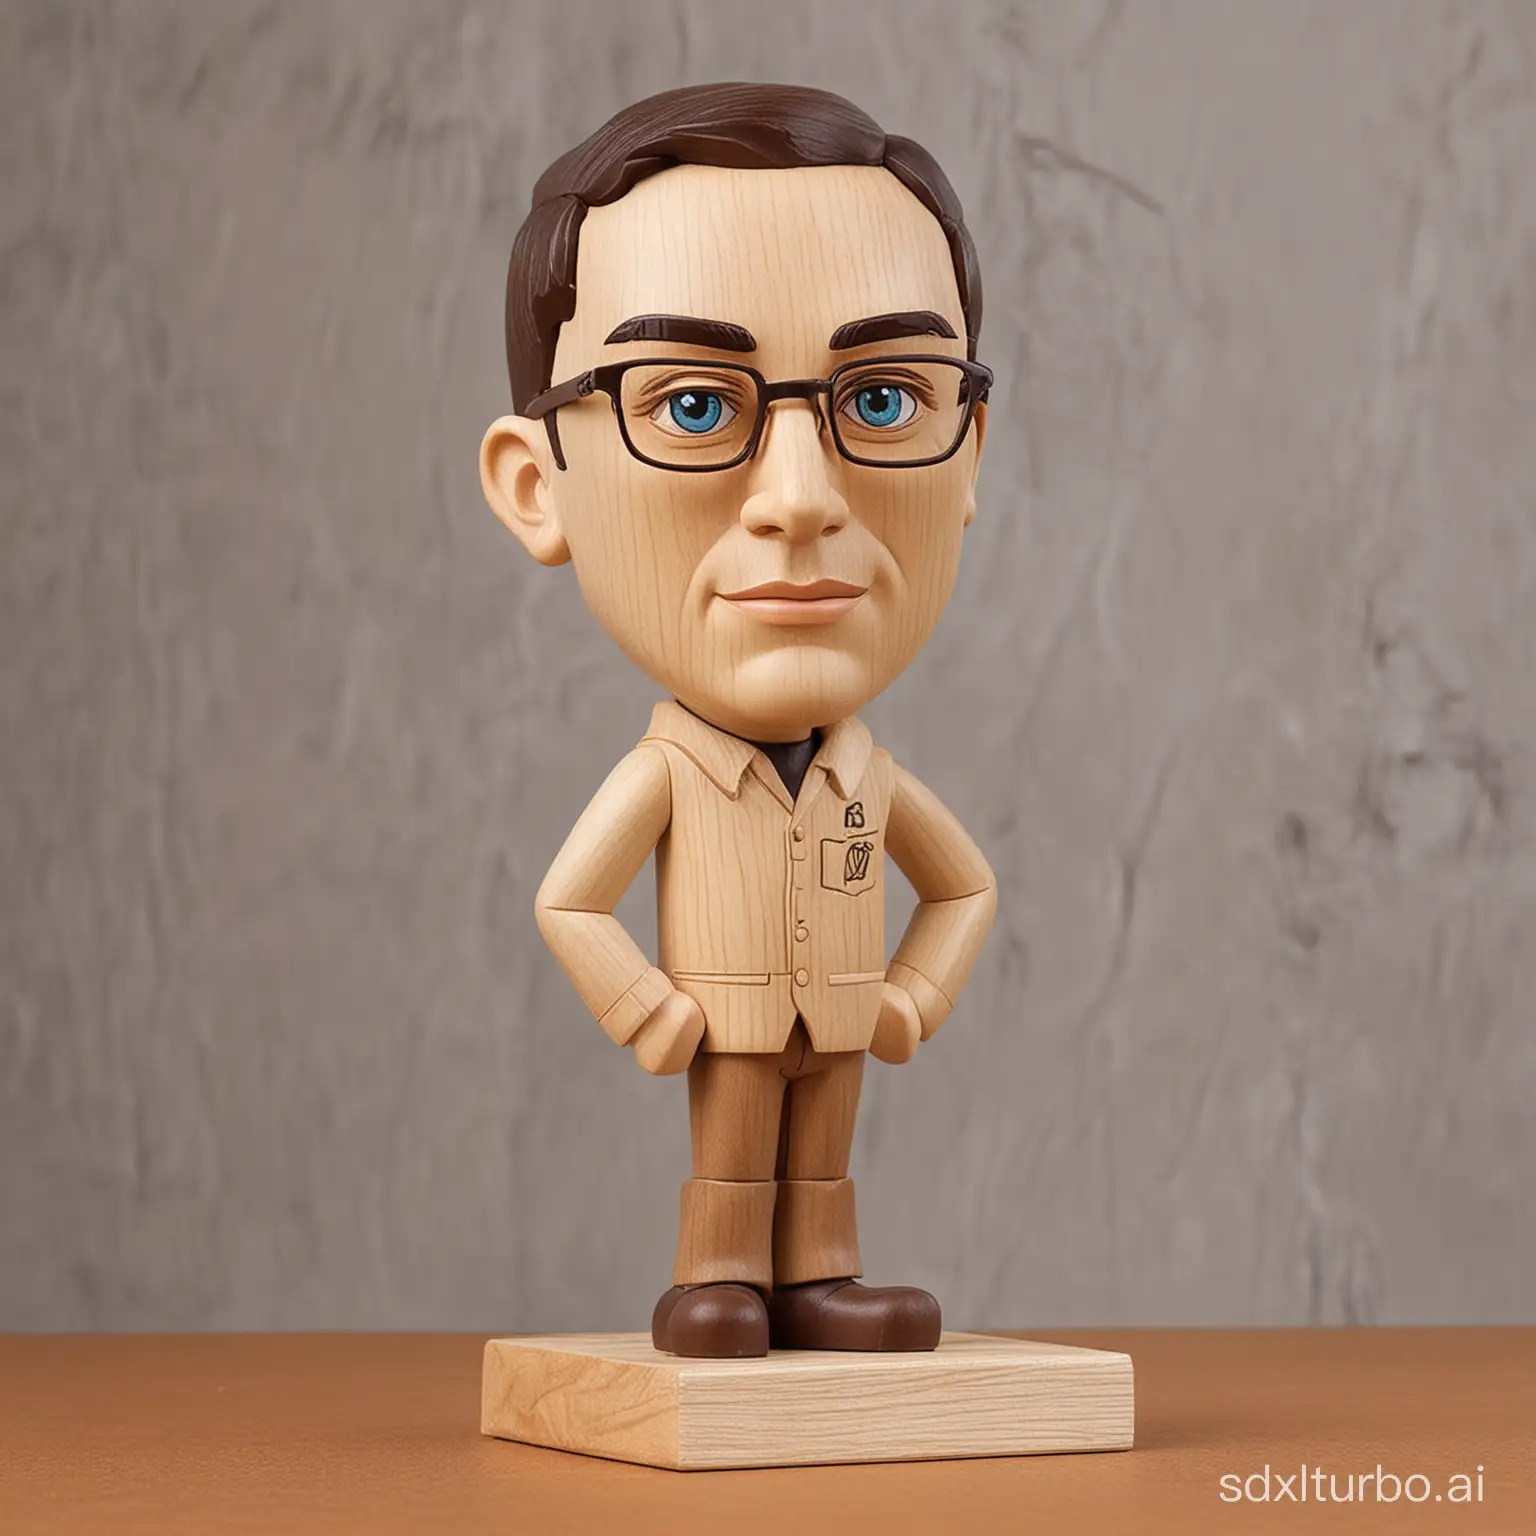 Wooden-Sheldon-Cooper-Sculpture-with-Young-Man